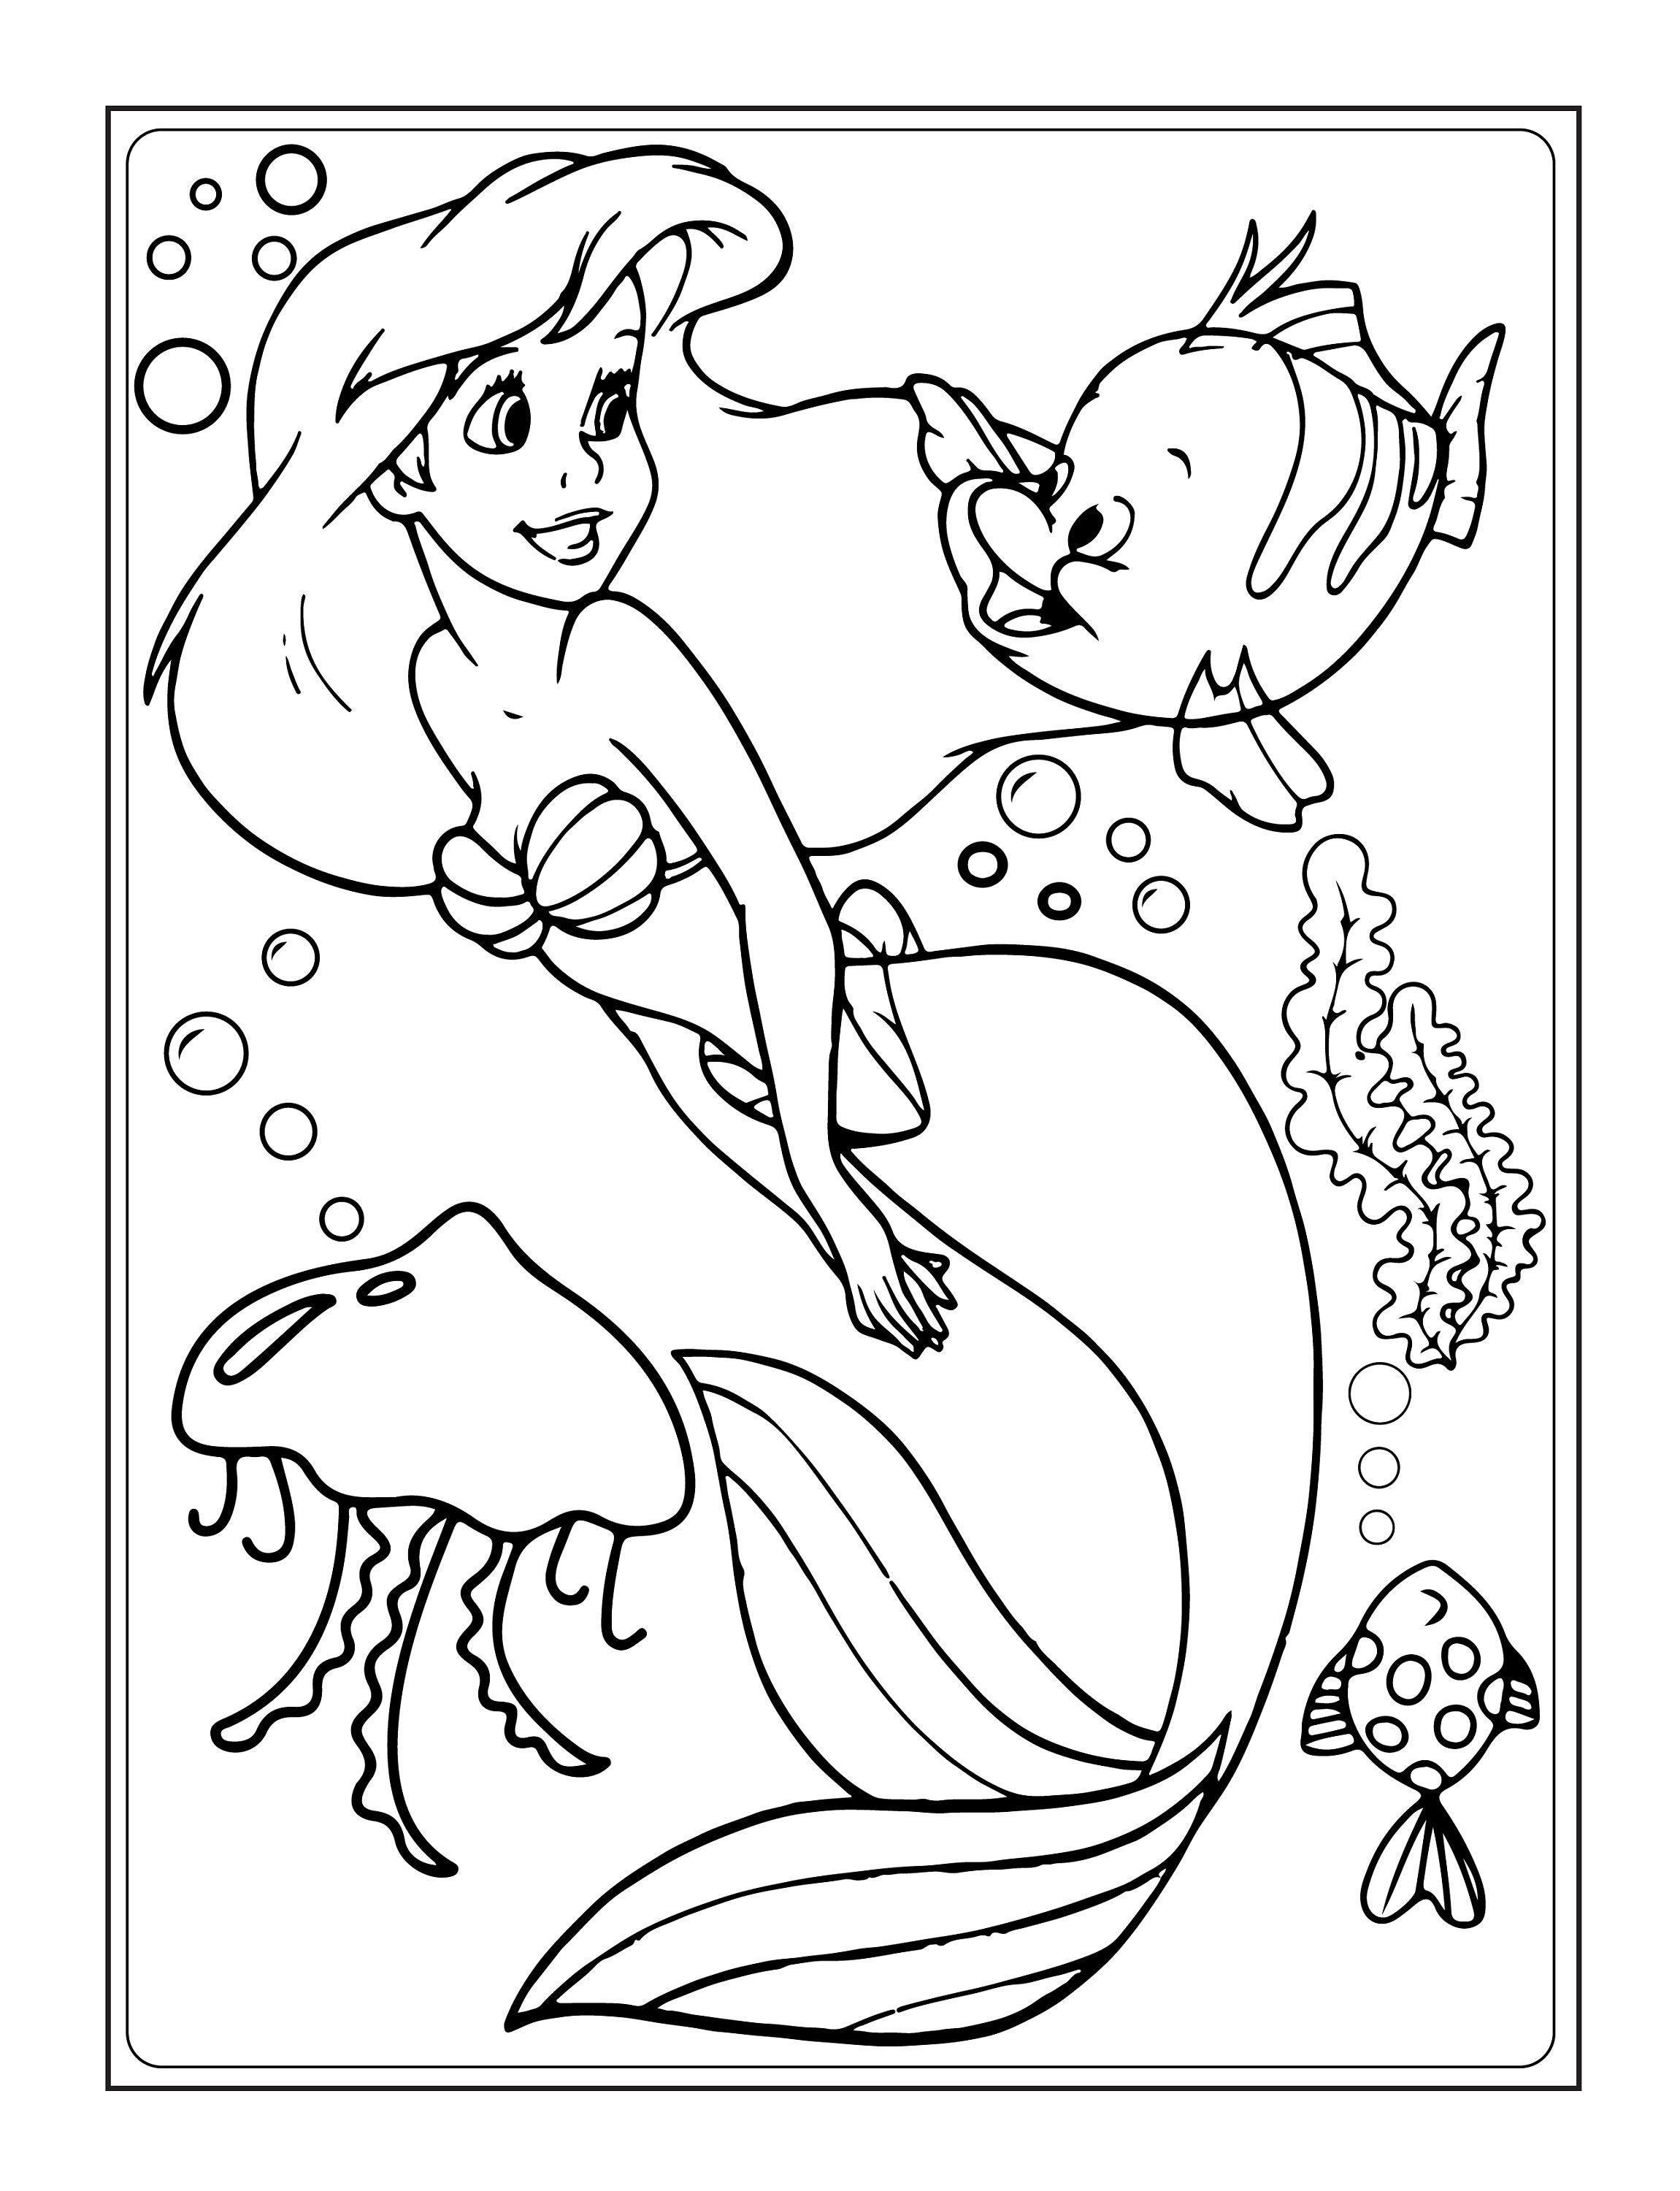 Printable Little Mermaid s Coloring Page for kids.